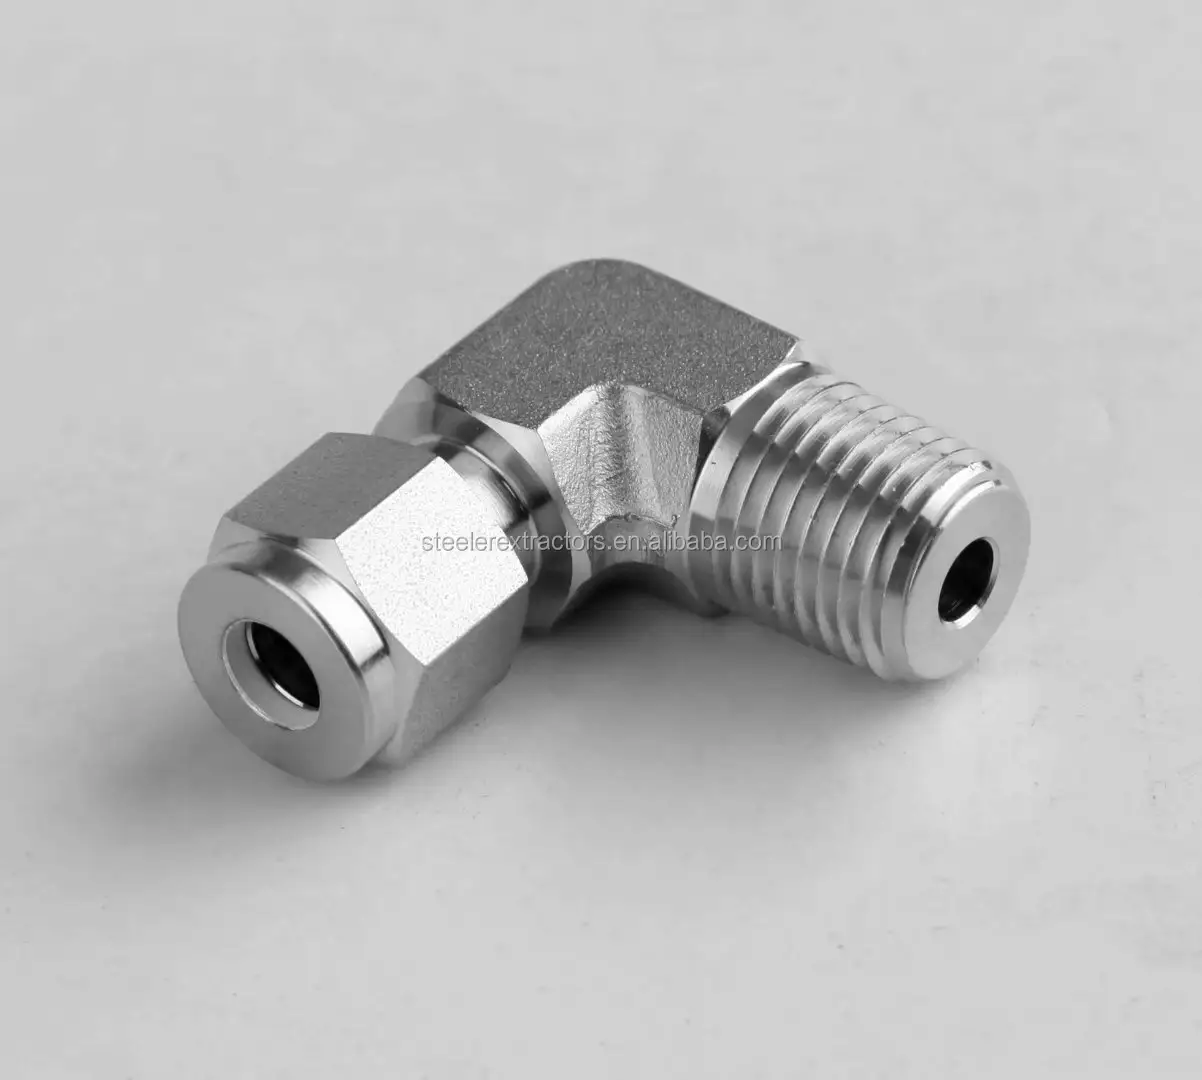 Male 90 degree Elbow Connector Twin Ferrule Compression Tube Instrumentation Fittings 1/4" Tube x 1/4" NPT Male